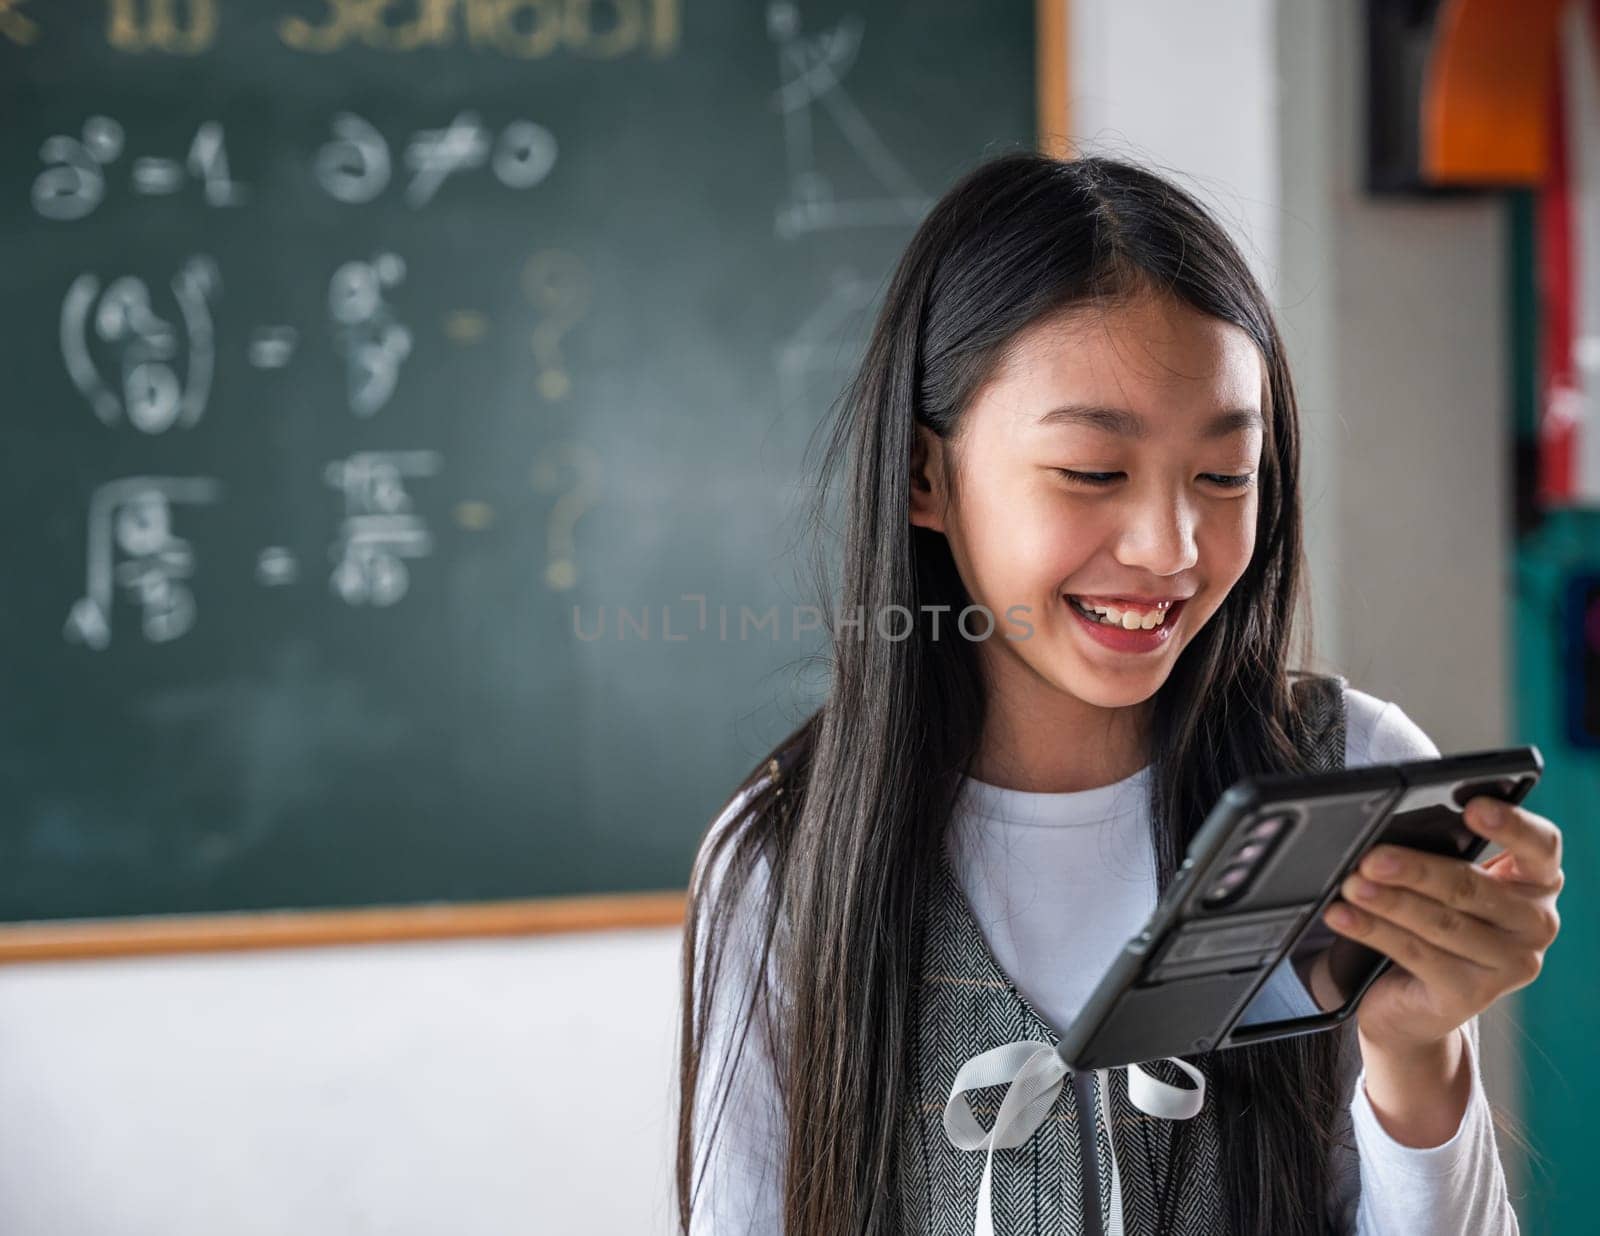 A girl is smiling while holding a cell phone in front of a blackboard with math by Sorapop